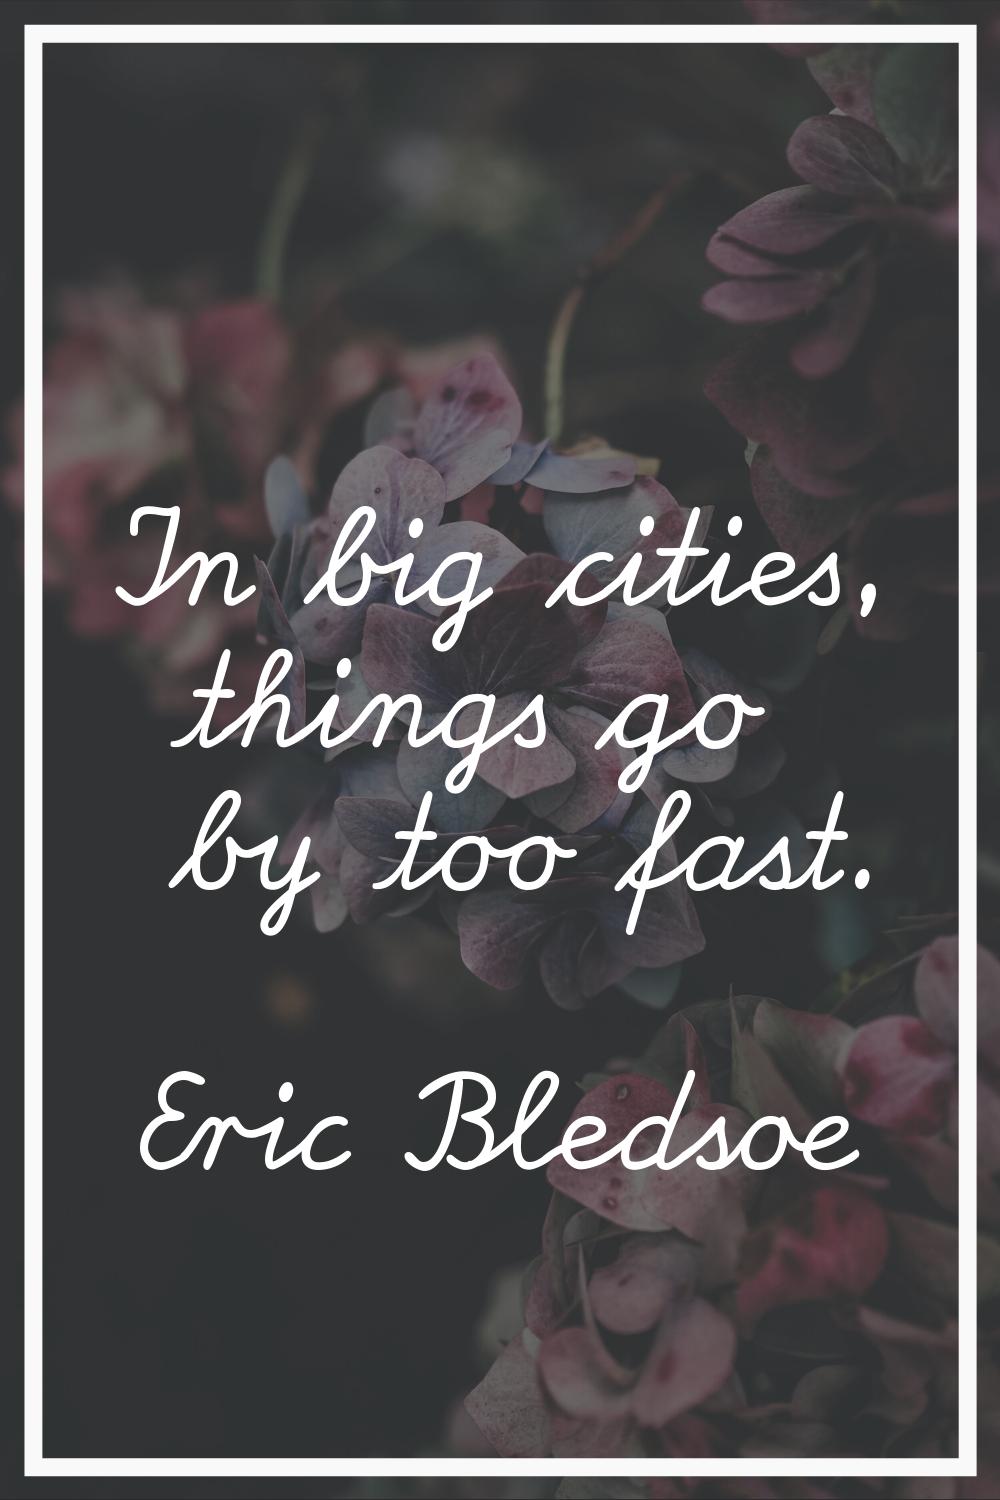 In big cities, things go by too fast.